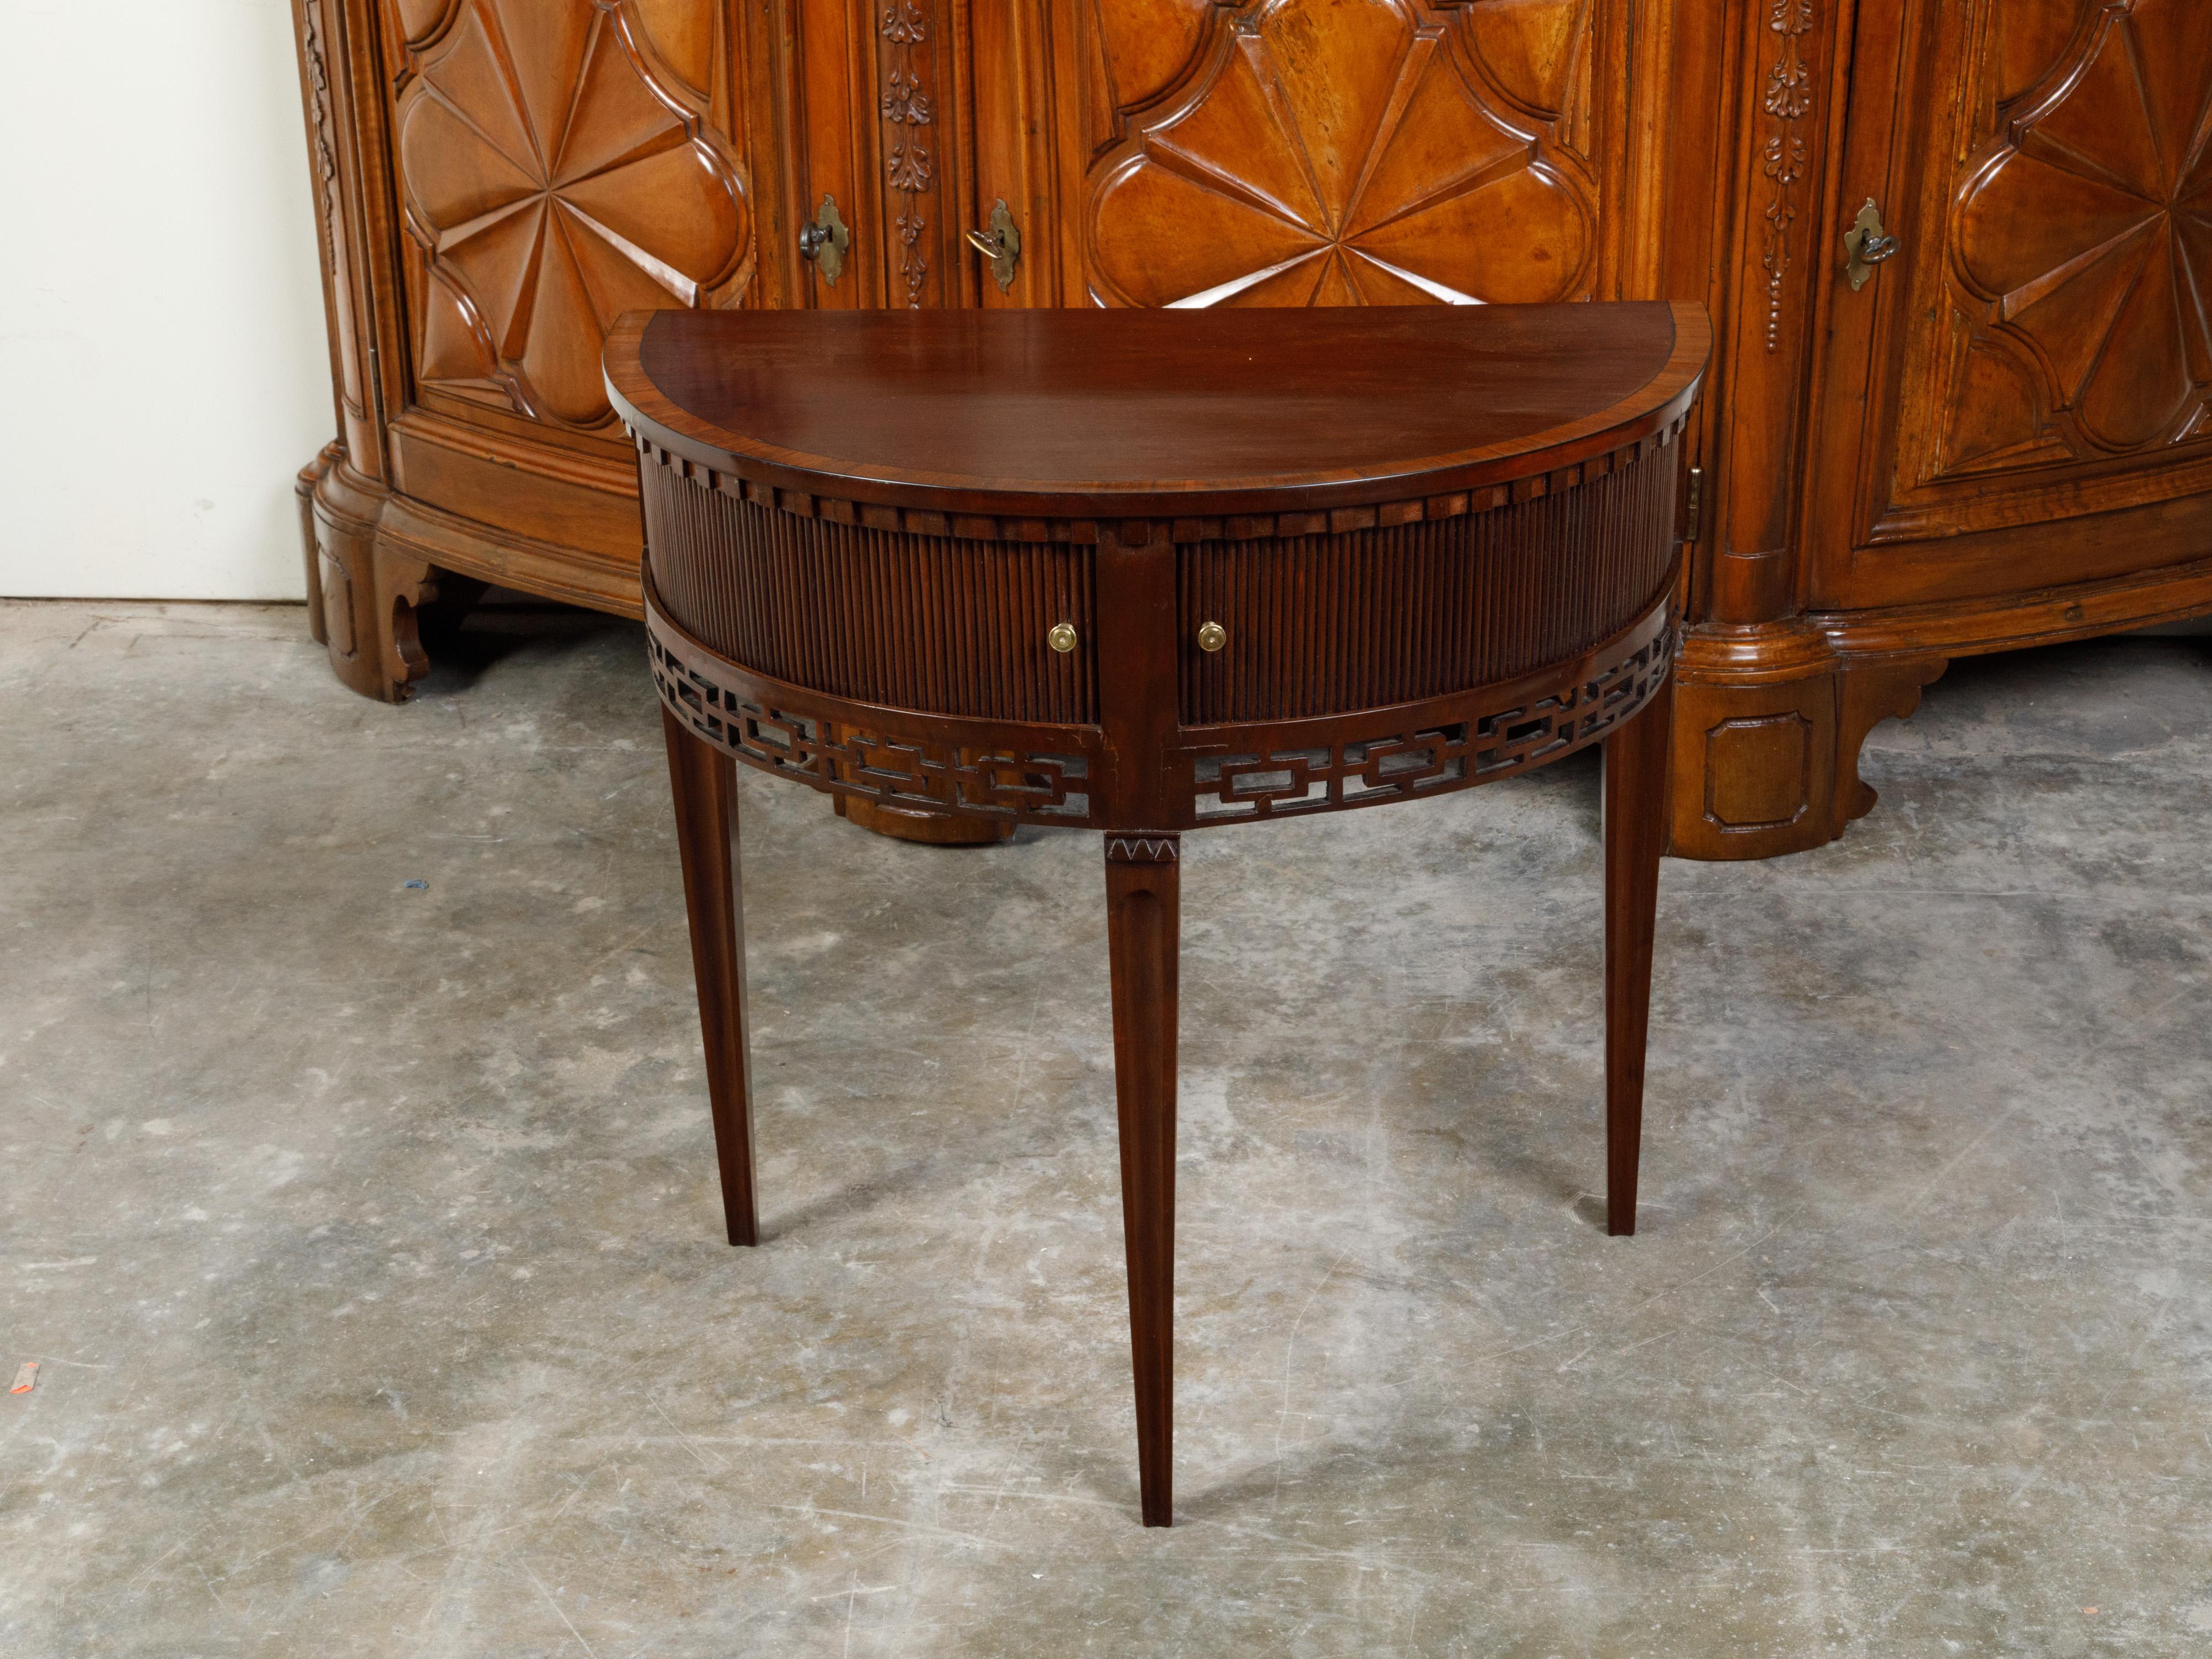 An English mahogany demi-lune console table from the 19th century, with a dentil cornice over two reeded tambour sliding doors and carved apron. Created in England during the 19th century, this demi-lune console table features a semi-circular